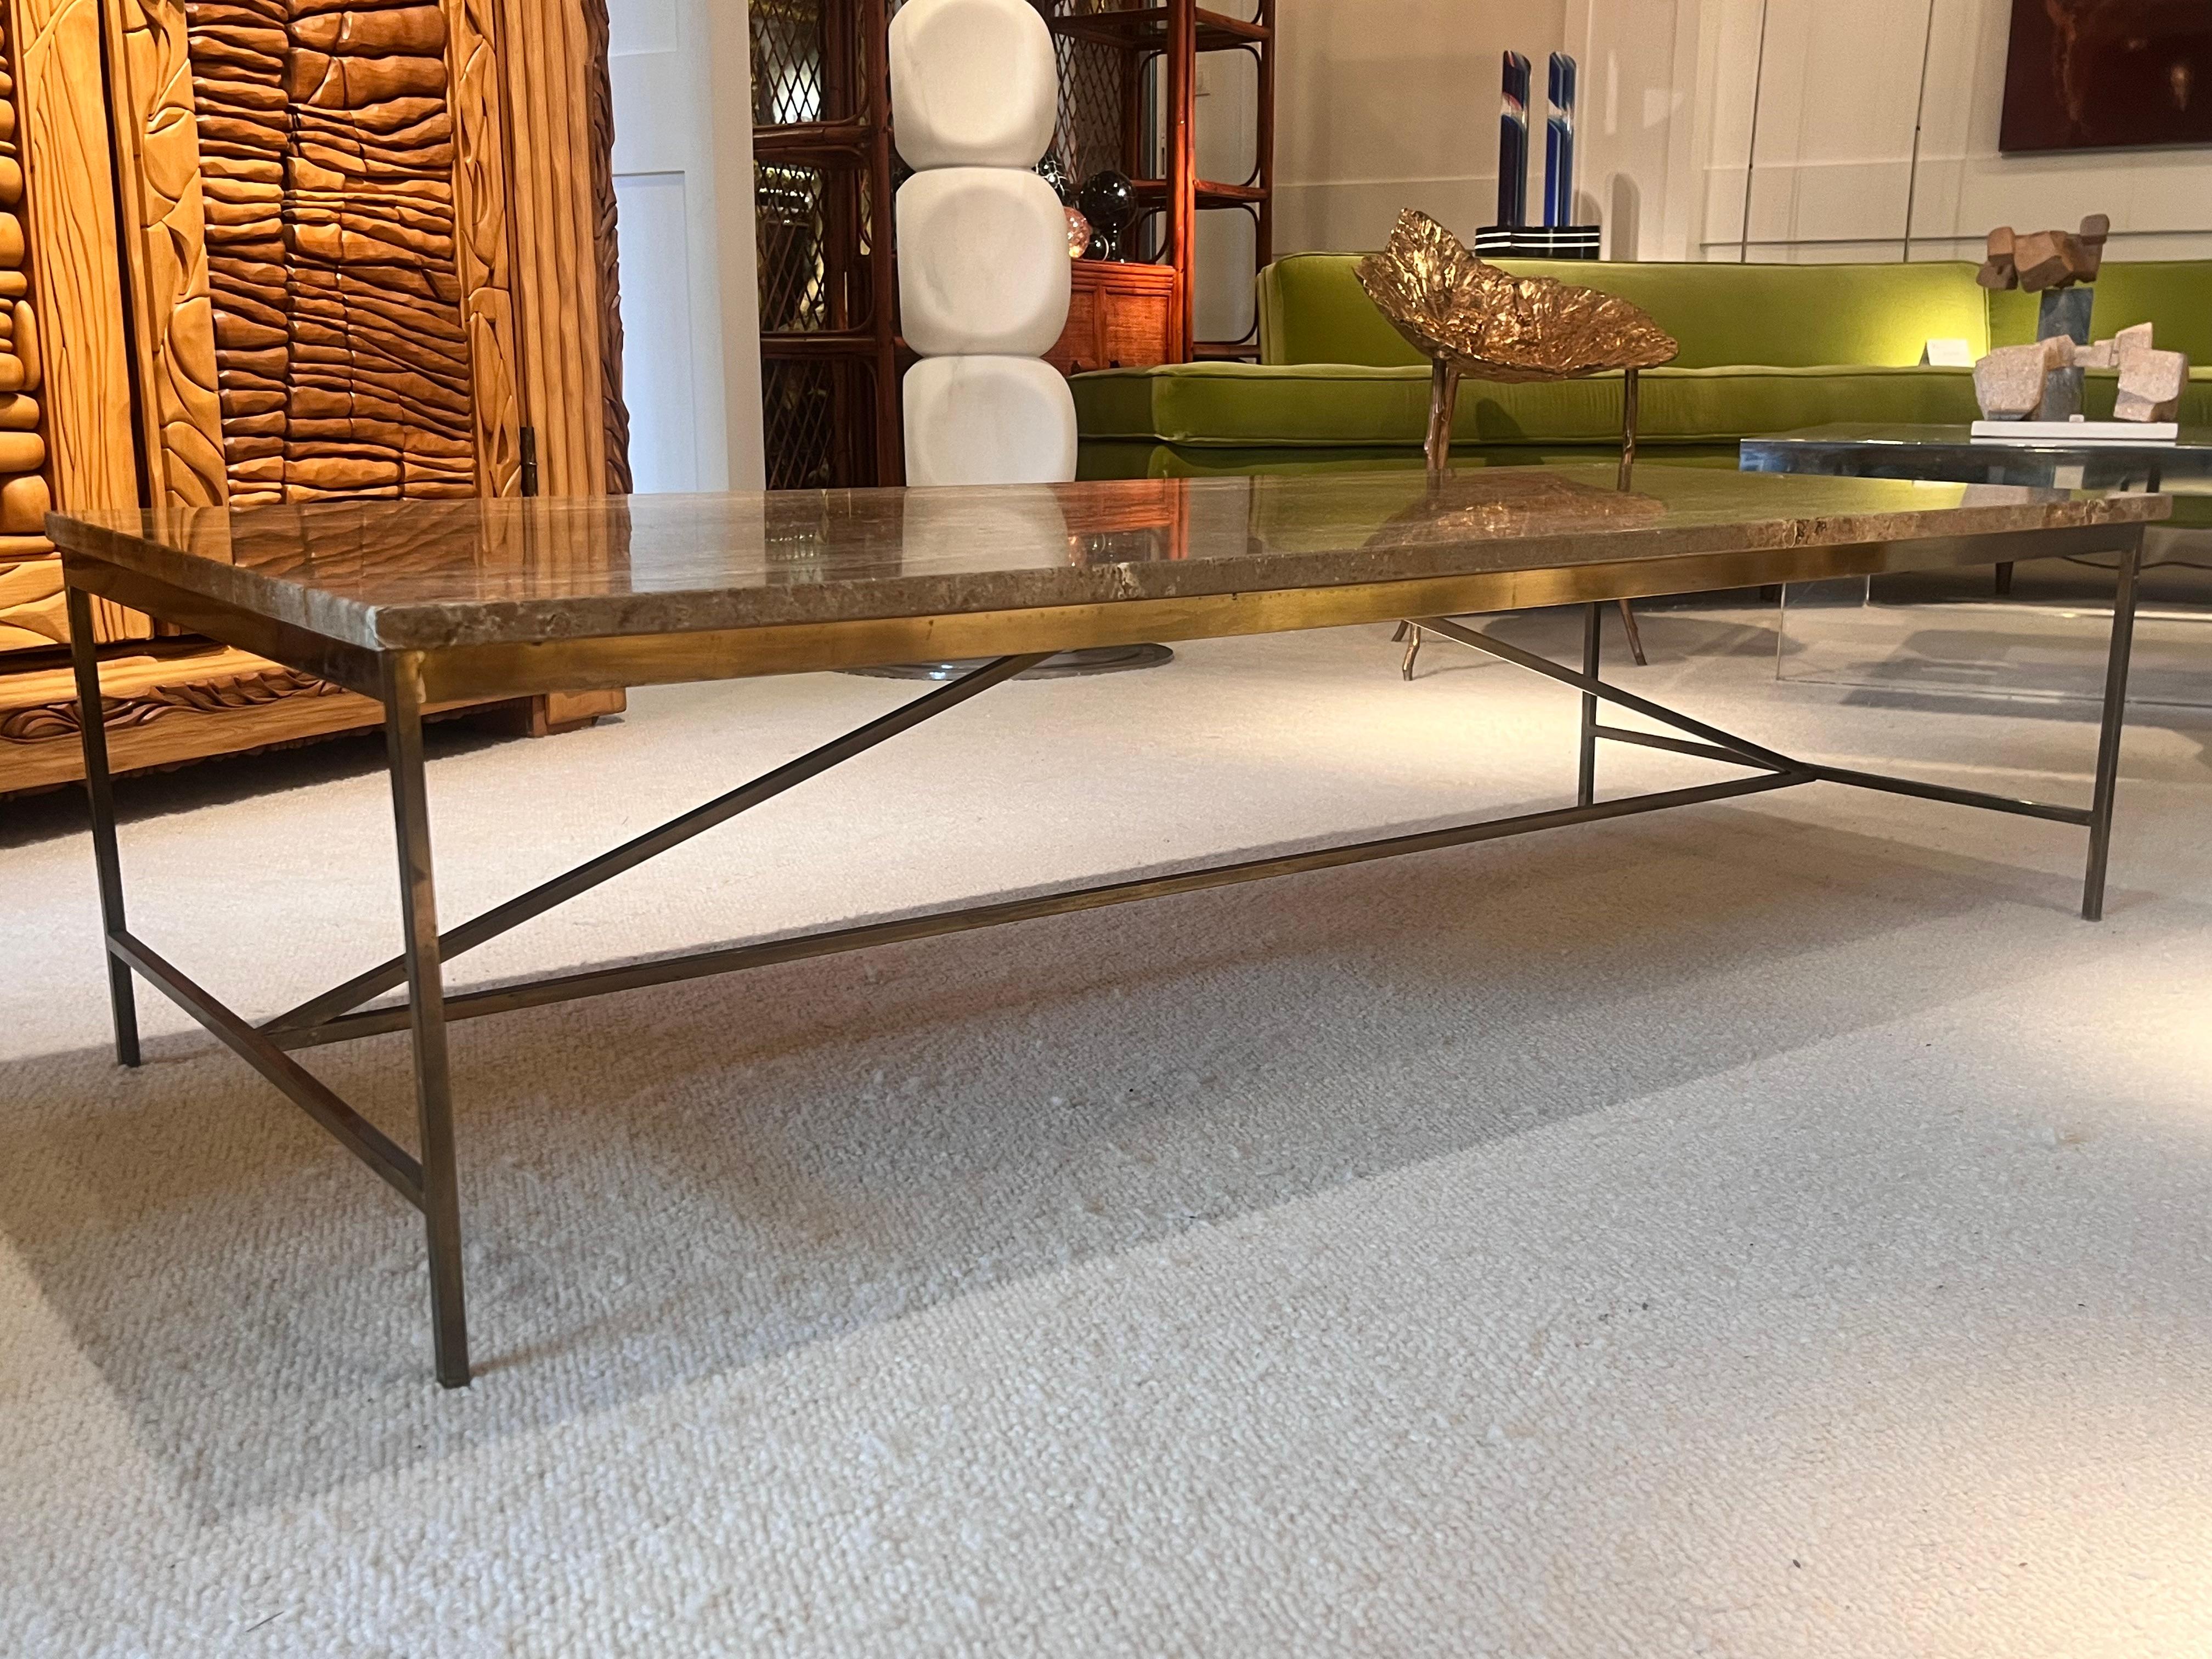 Mid-20th Century Brass frame coffee table with brown-veined marble top by Paul McCobb